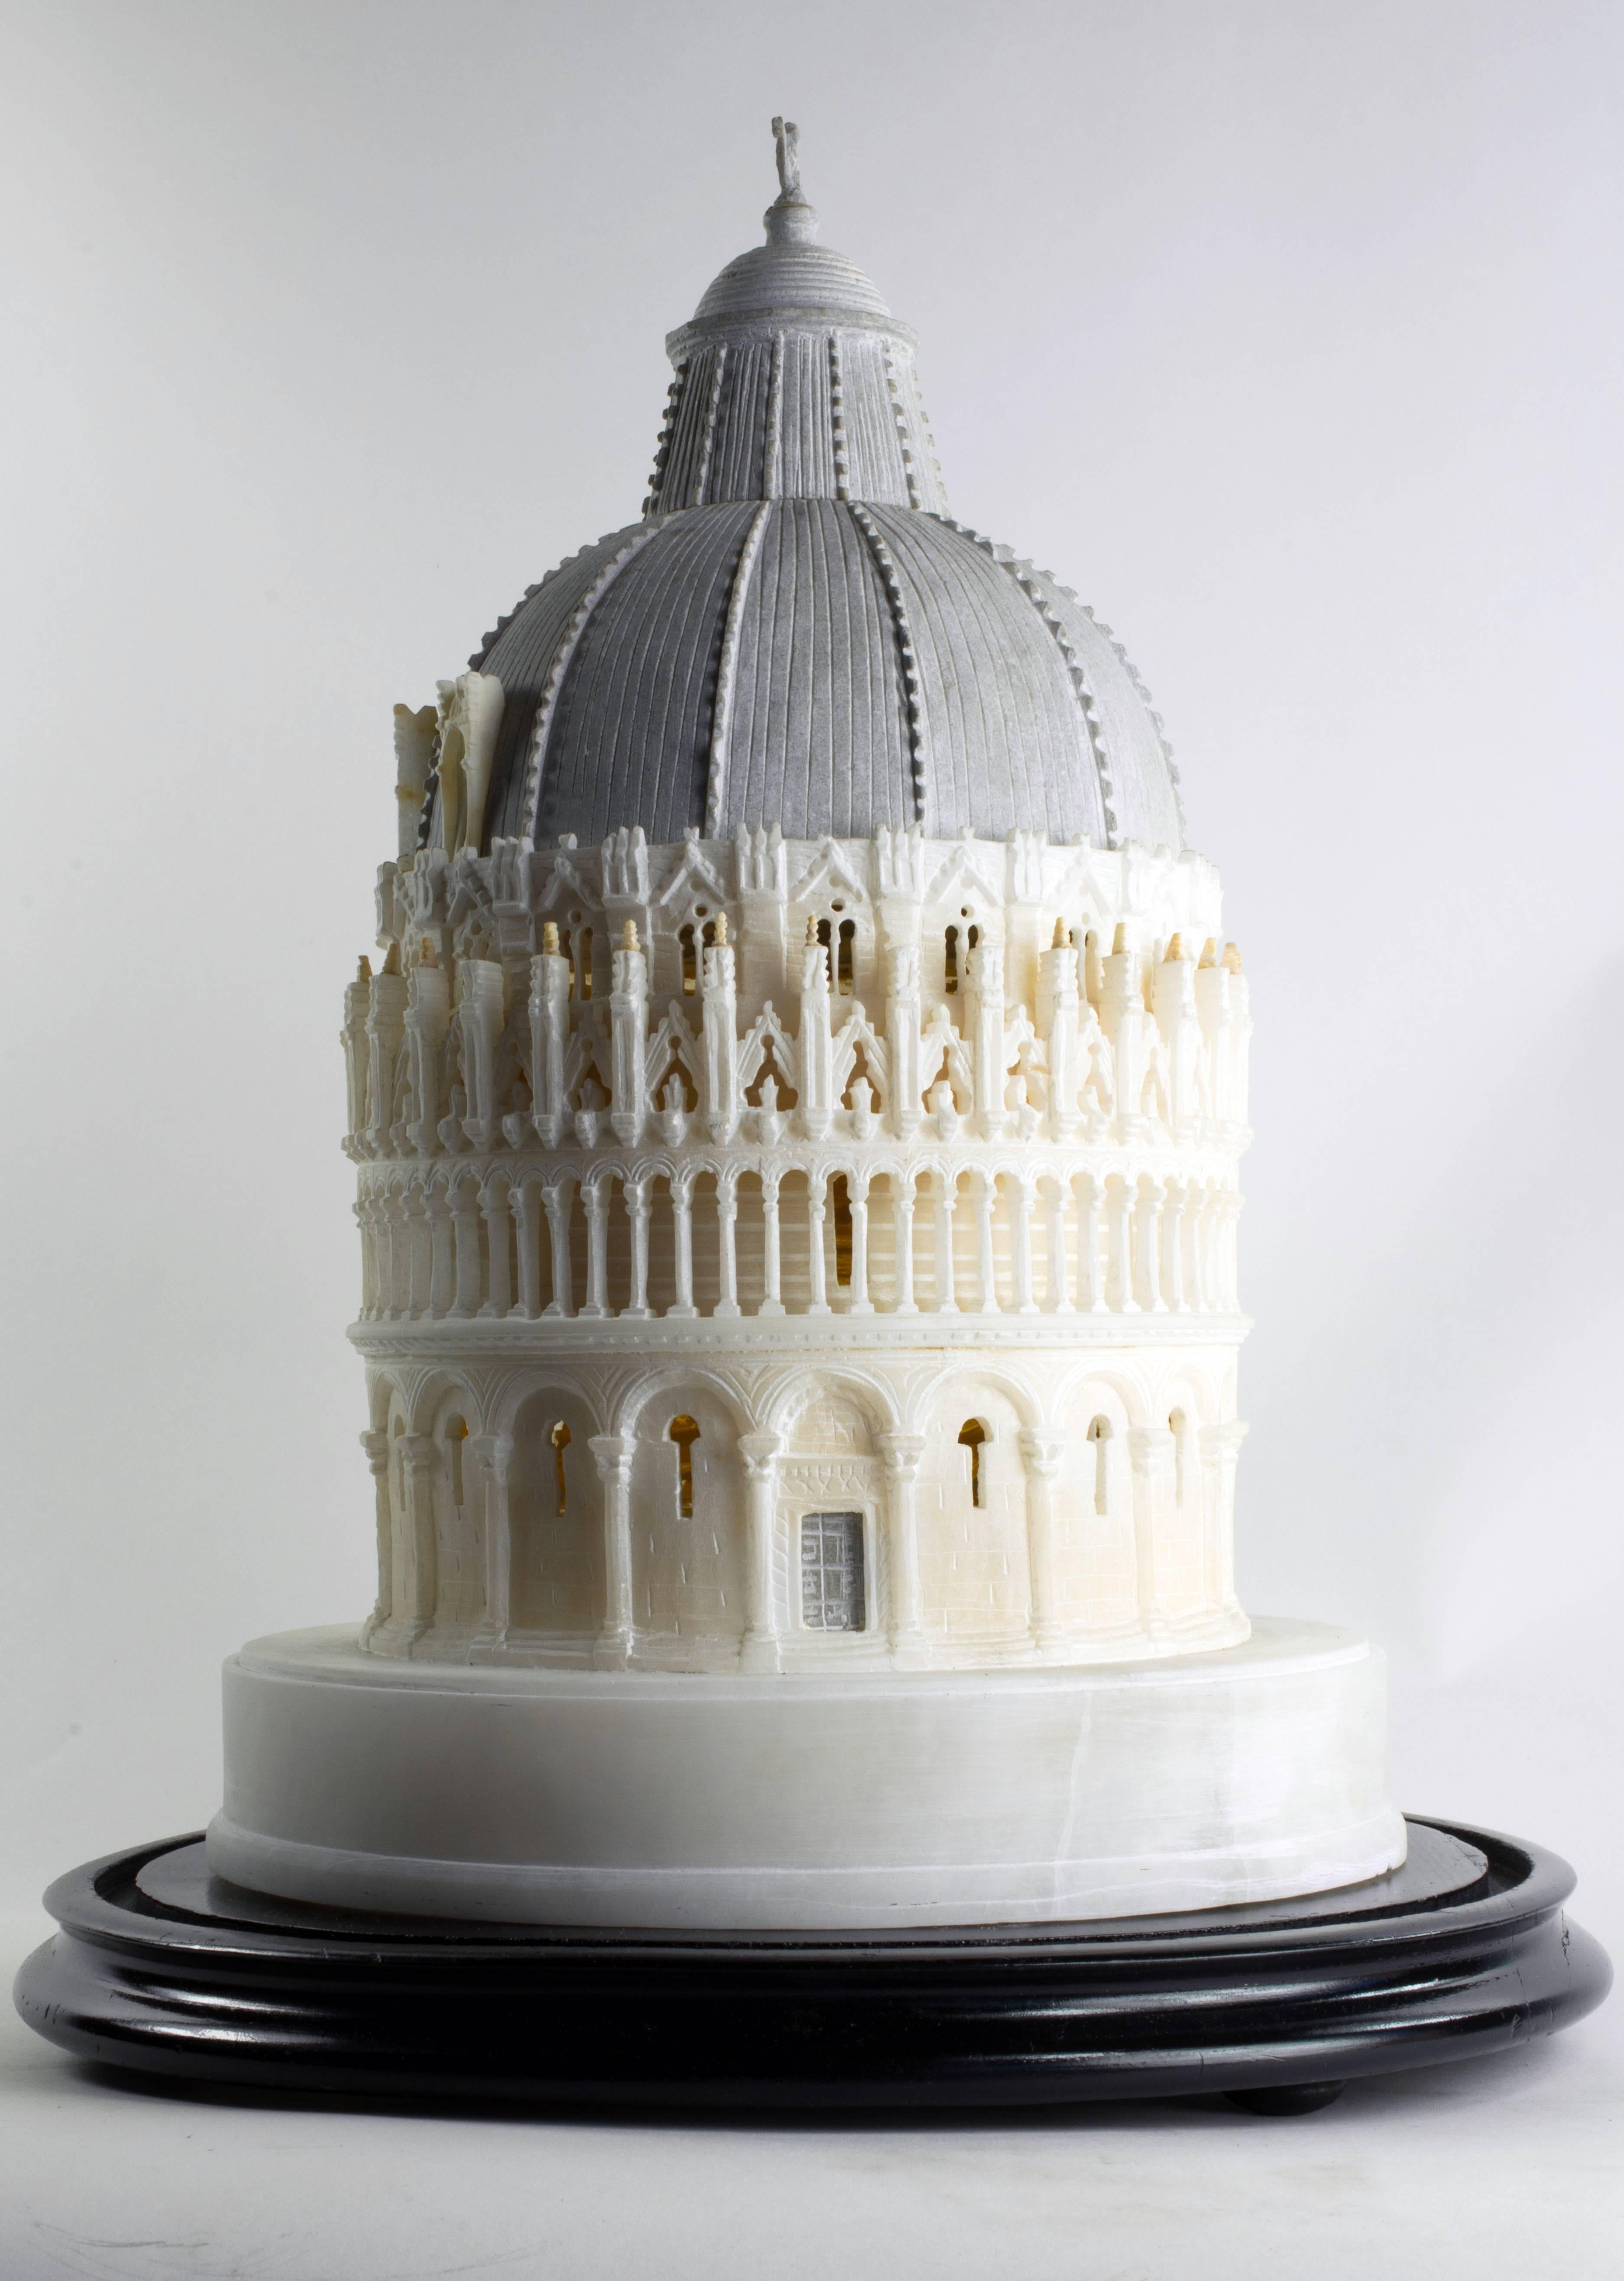 St. John’s Baptistry, Pisa, mounted on wooden base, with glass dome.
Alabaster, 12” H.
Pisa, circa 1880.

With the city of Pisa, in Italy’s Northwest, Ligurian coast, our thoughts run to the Tower. In architectural history, never has